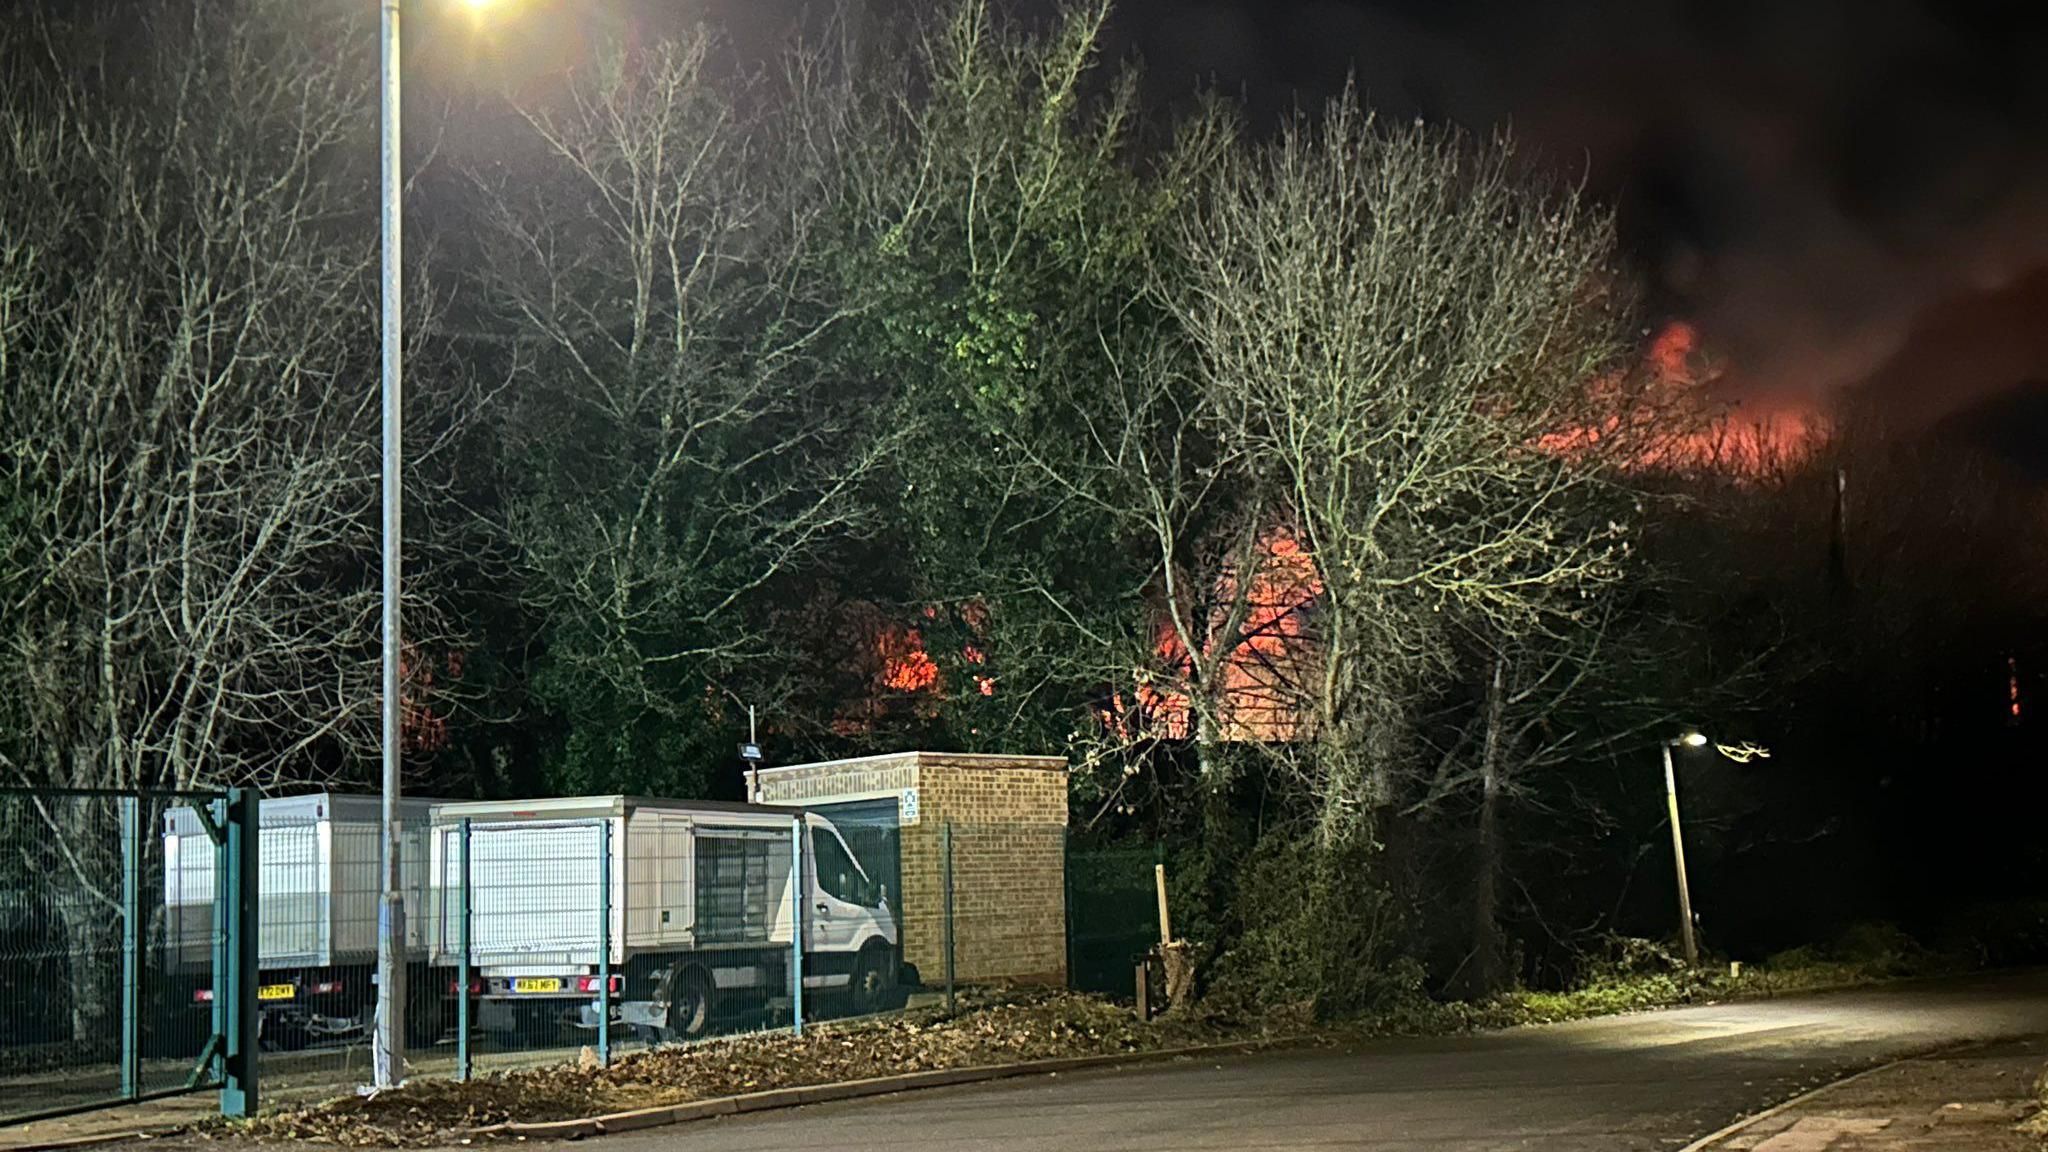 A fire at a recycling centre in Hitchin, Hertfordshire